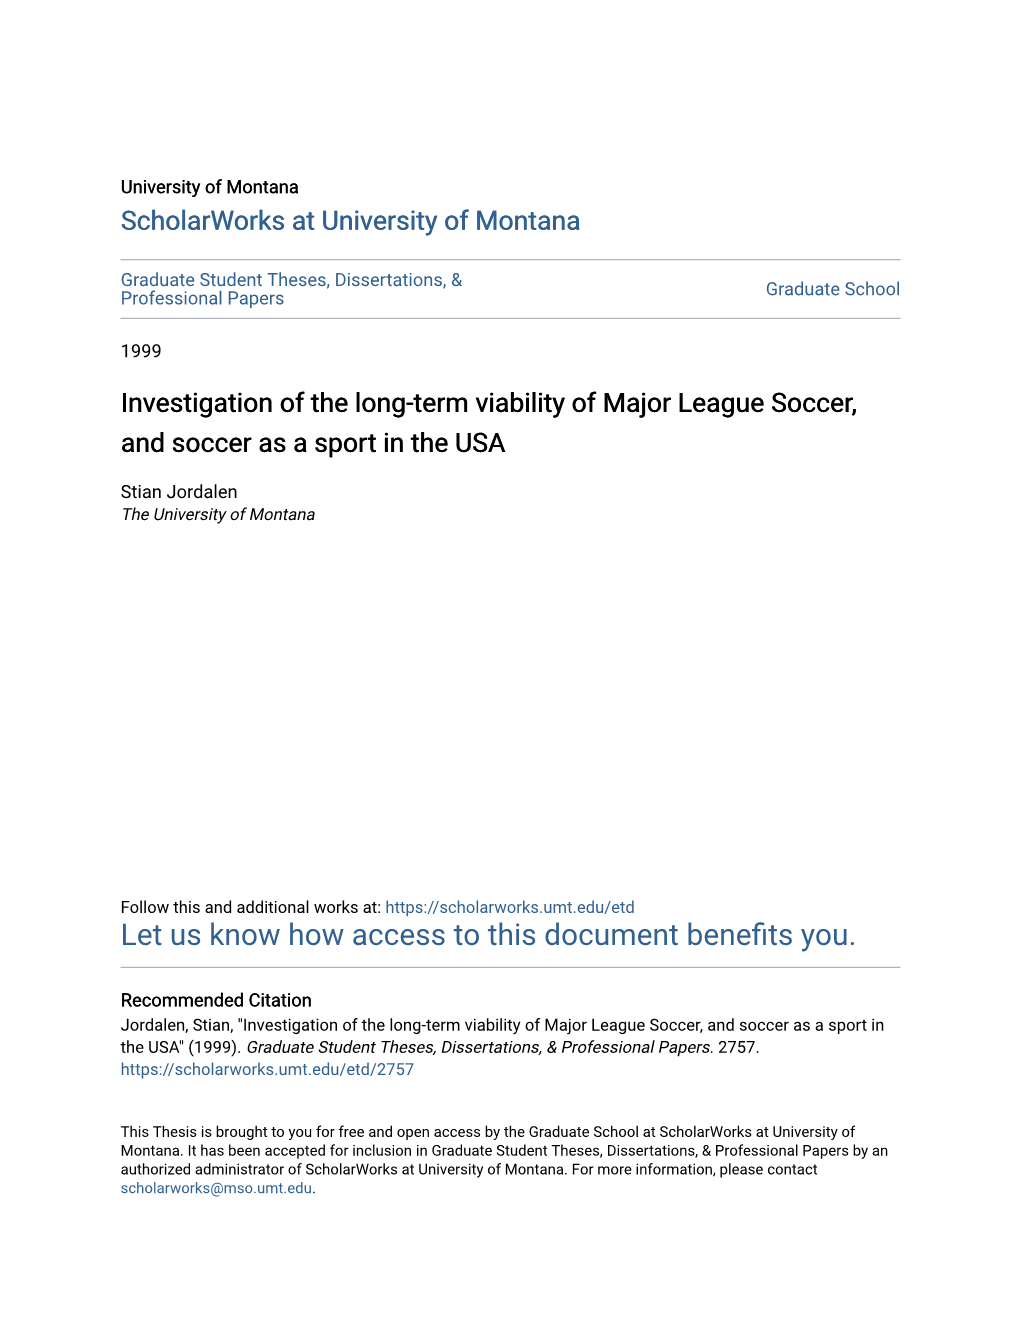 Investigation of the Long-Term Viability of Major League Soccer, and Soccer As a Sport in the USA